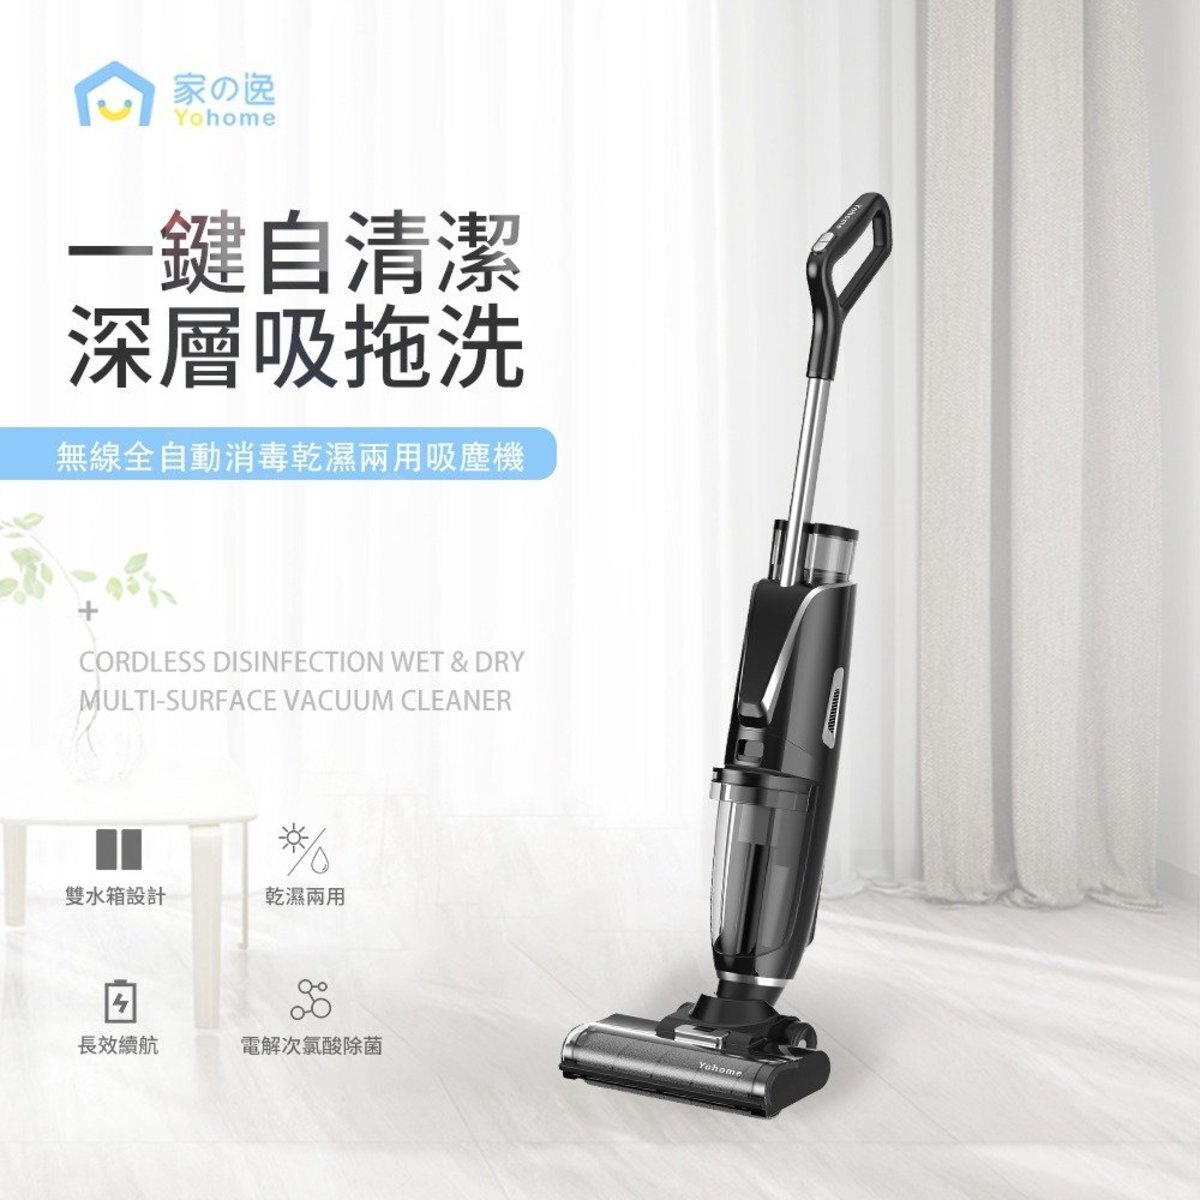 Home's Ease - Japanese Yohome Wireless Fully Automatic Disinfection Wet and Dry Vacuum Cleaner Special HEPA Filter